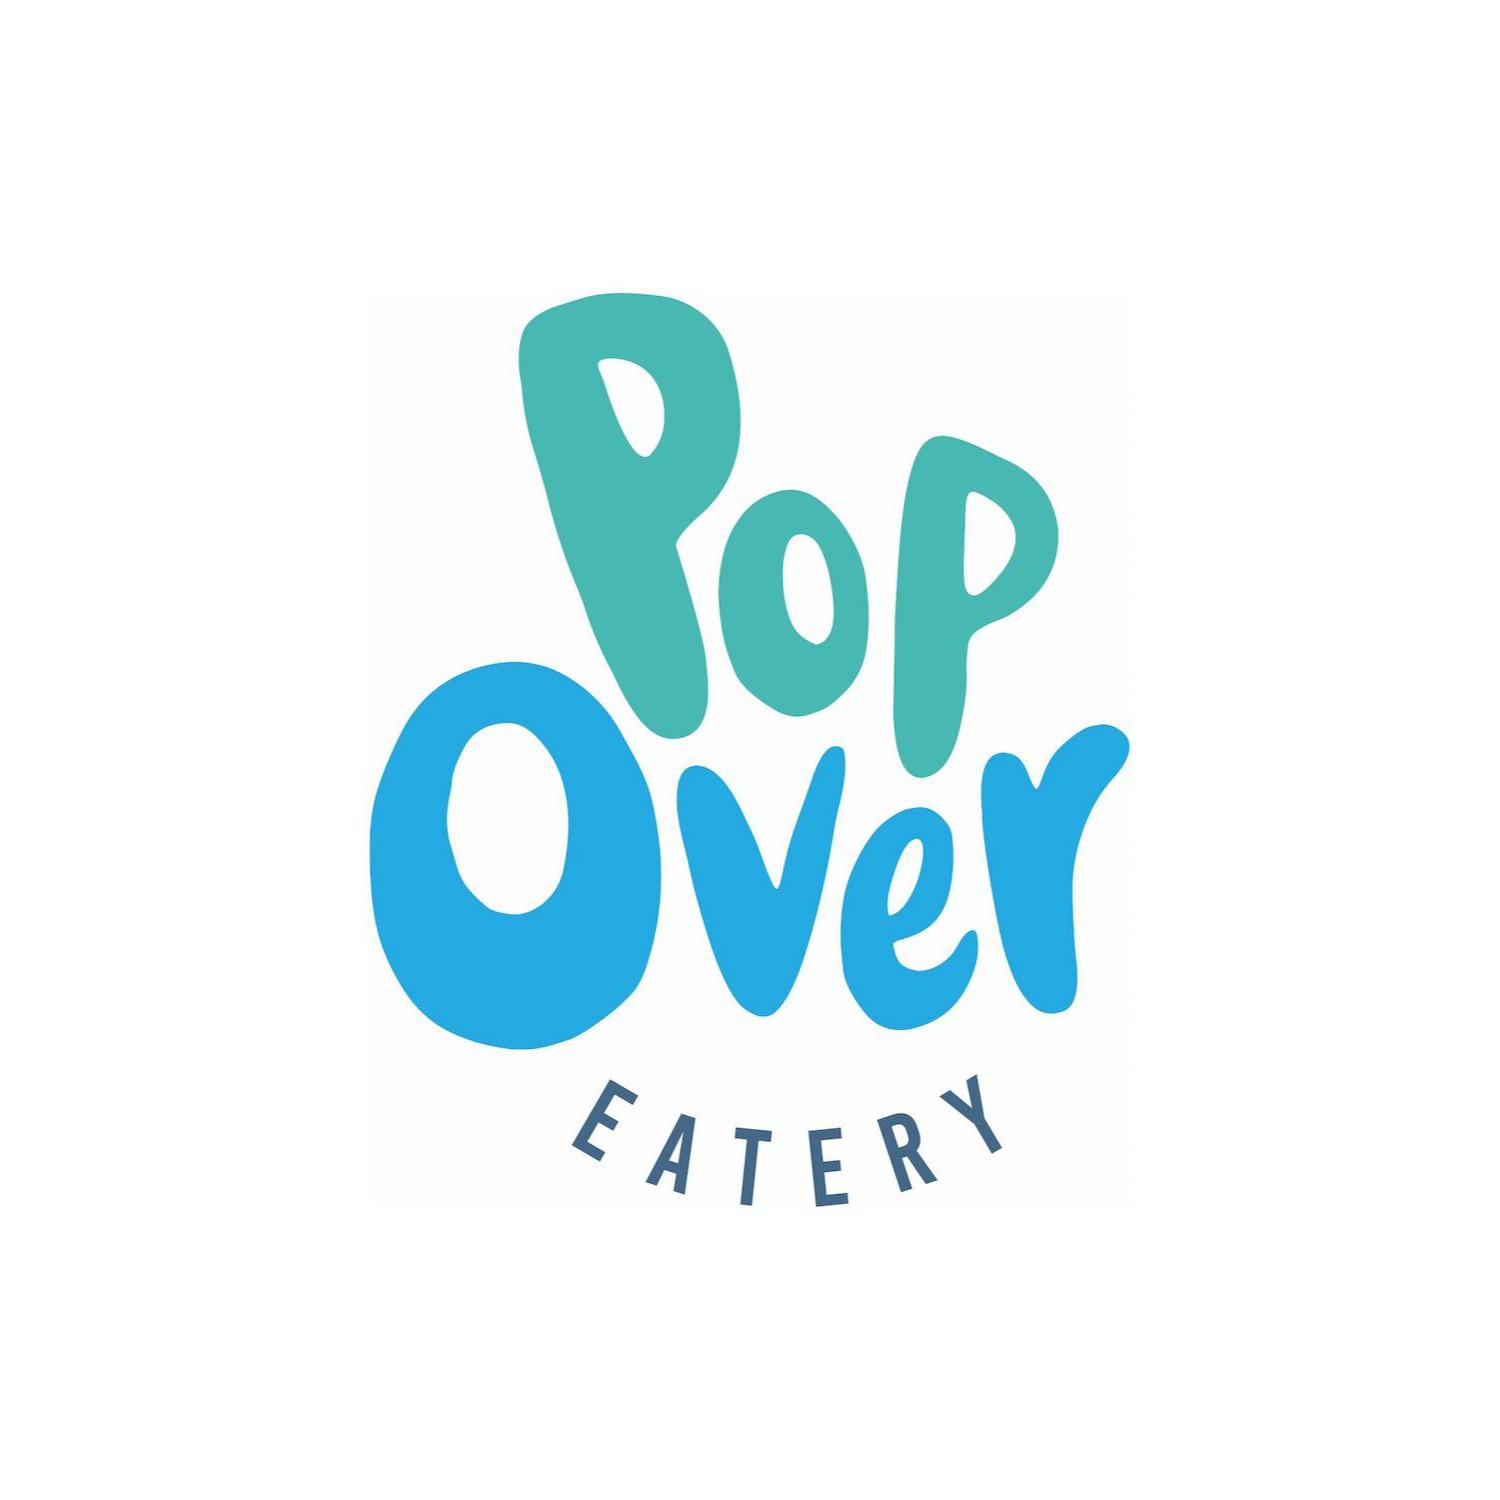 Pop Over Eatery - Mystic, CT 06355 - (860)245-5139 | ShowMeLocal.com